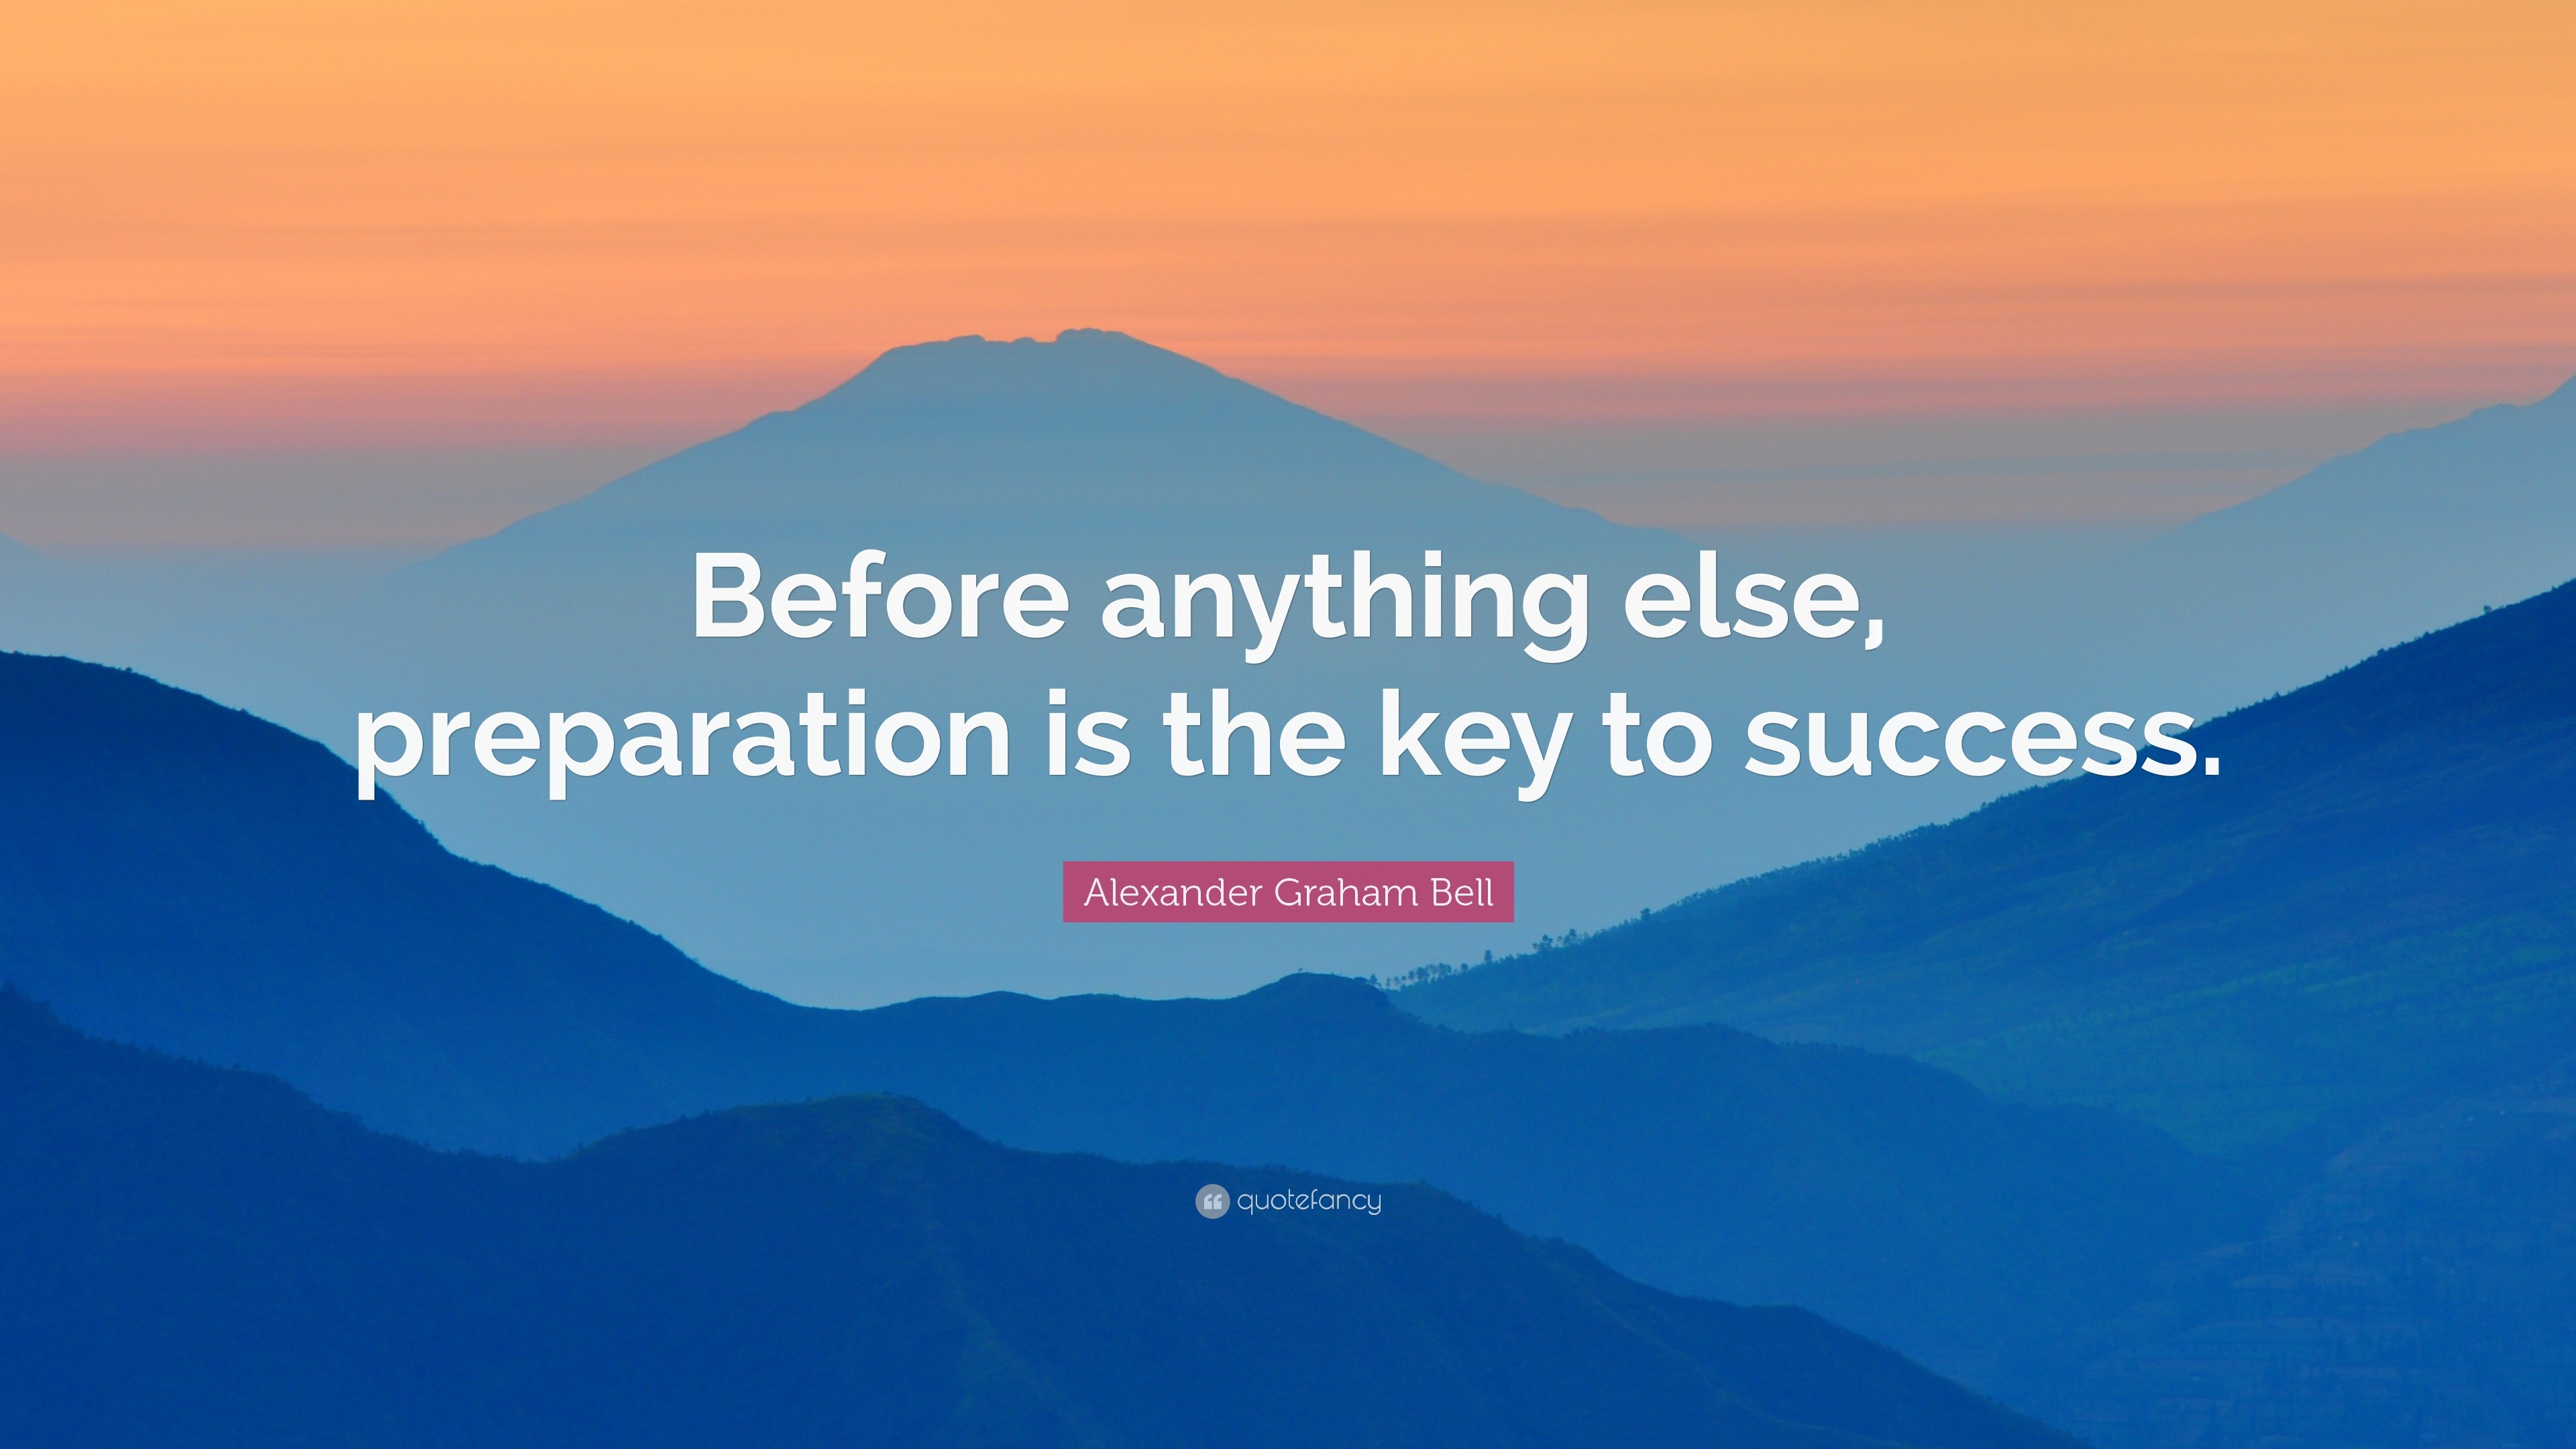 Alexander Graham Bell Quote: “Before anything else, preparation is the ...